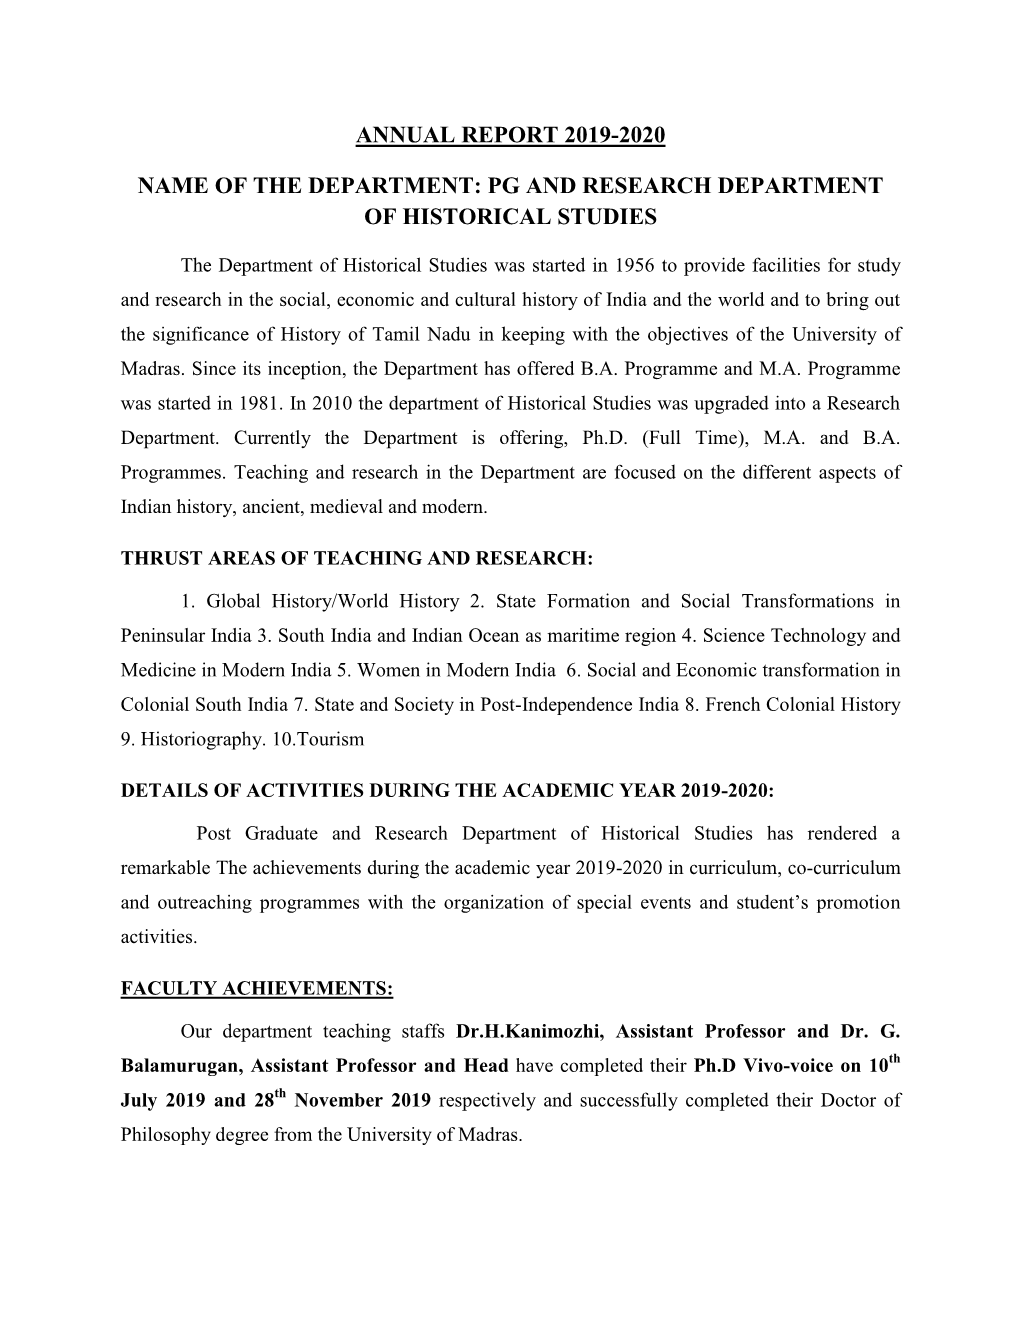 Annual Report 2019-2020 Name of the Department: Pg and Research